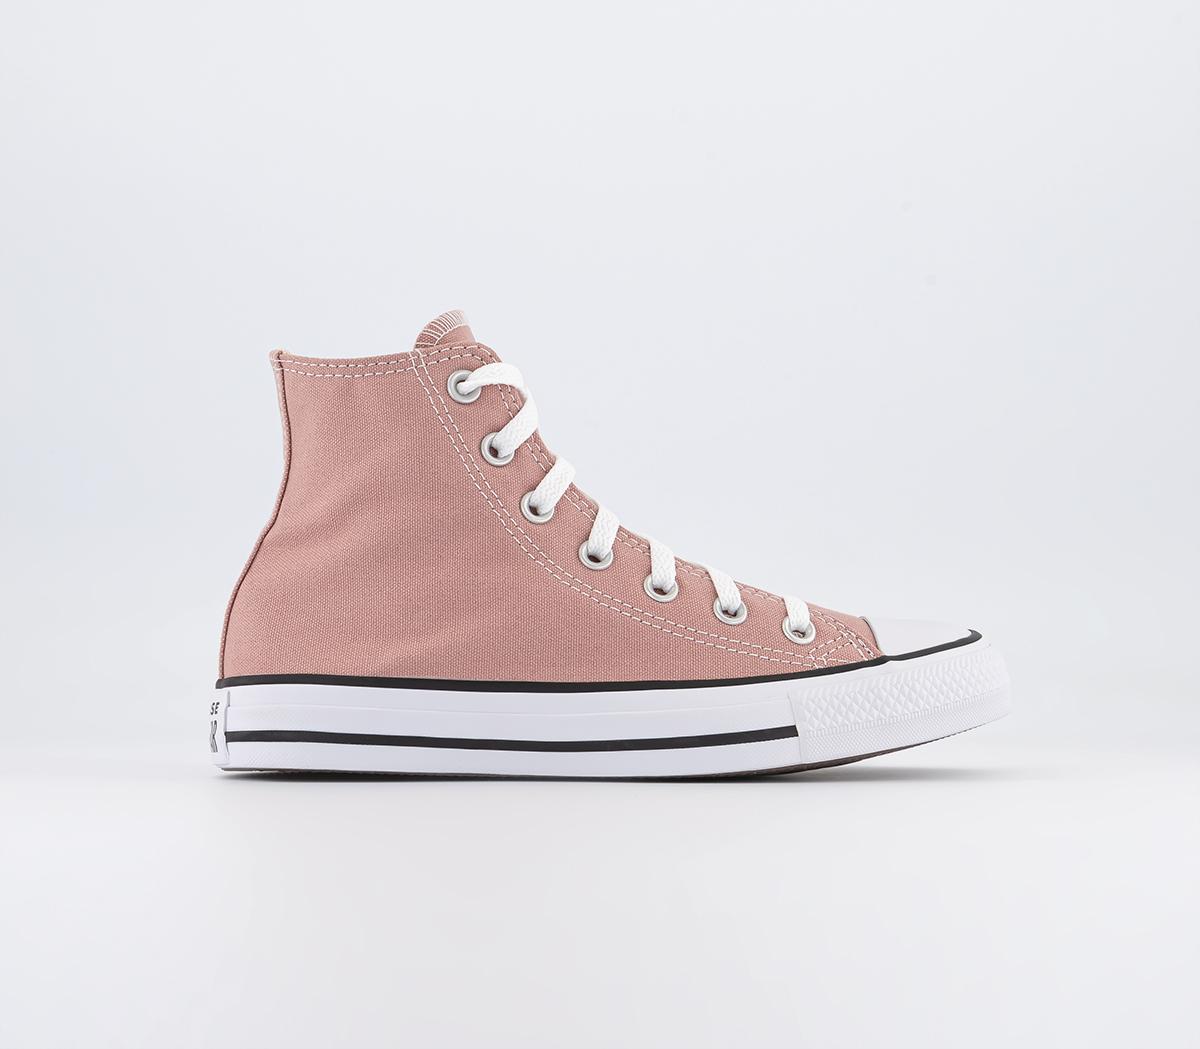 Converse Converse All Star Hi Trainers Canyon Dusk - Women's Trainers